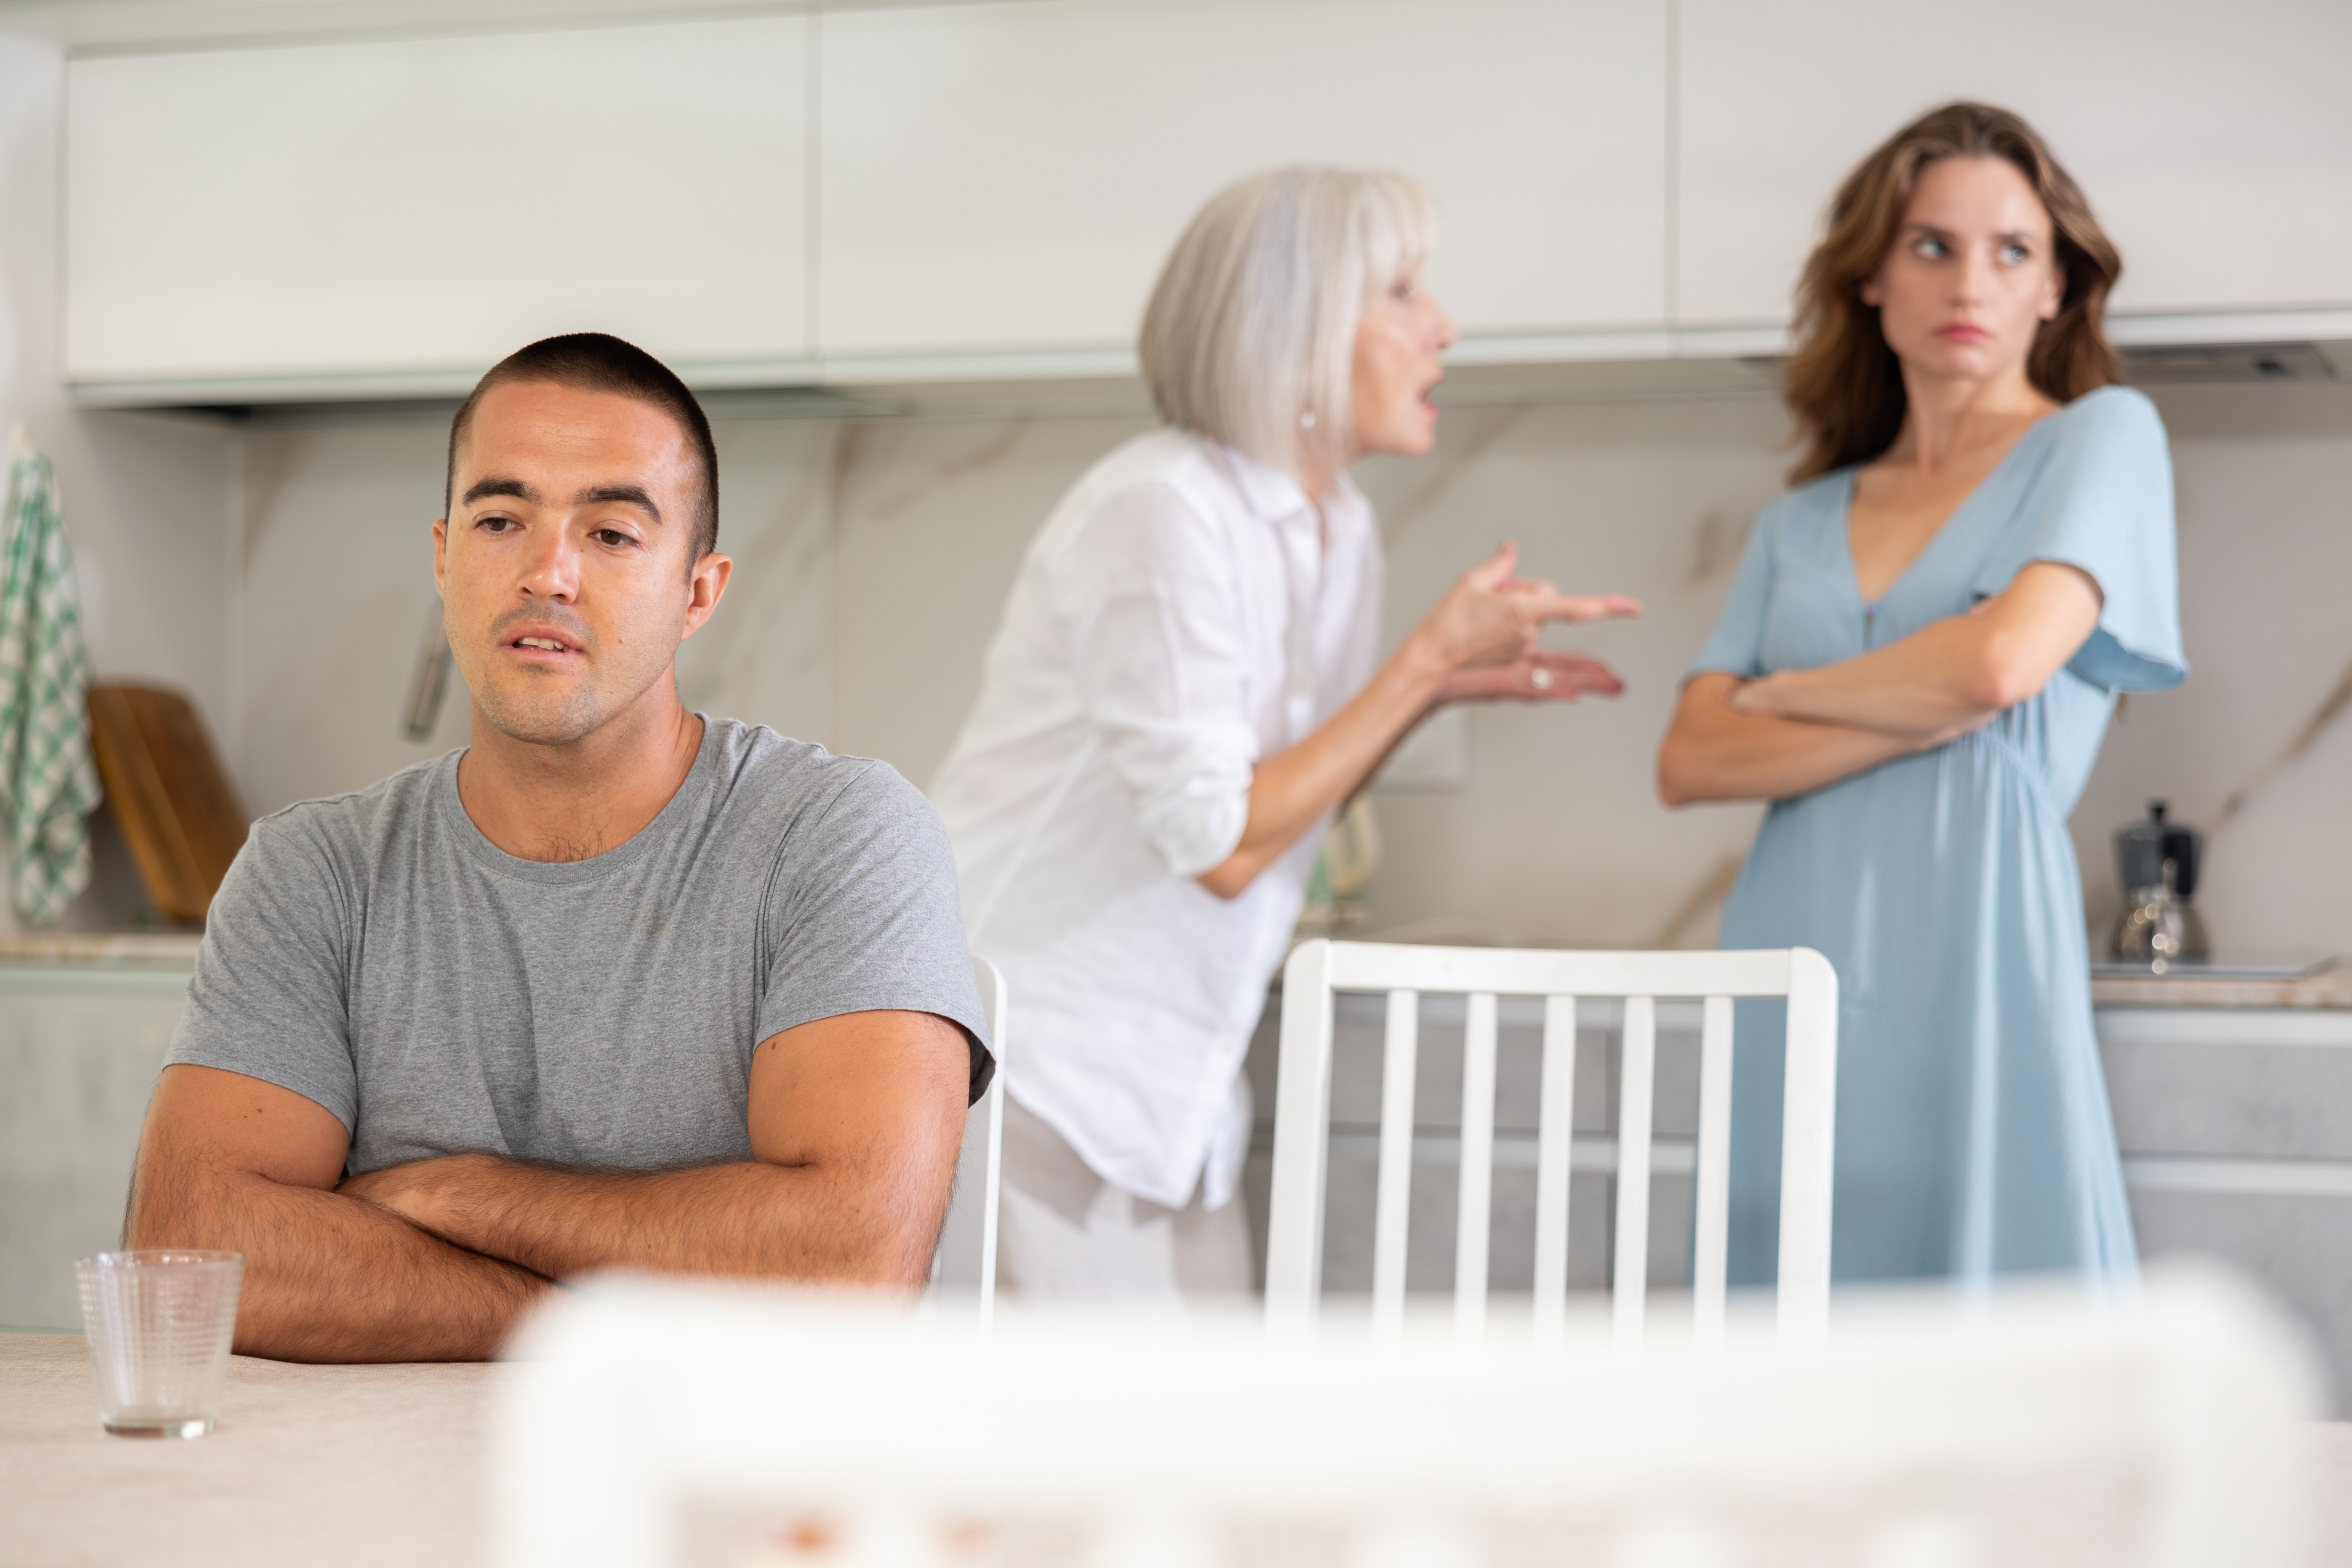 An older woman arguing with a younger woman who looks away as another man sits in front of them | Source: Shutterstock